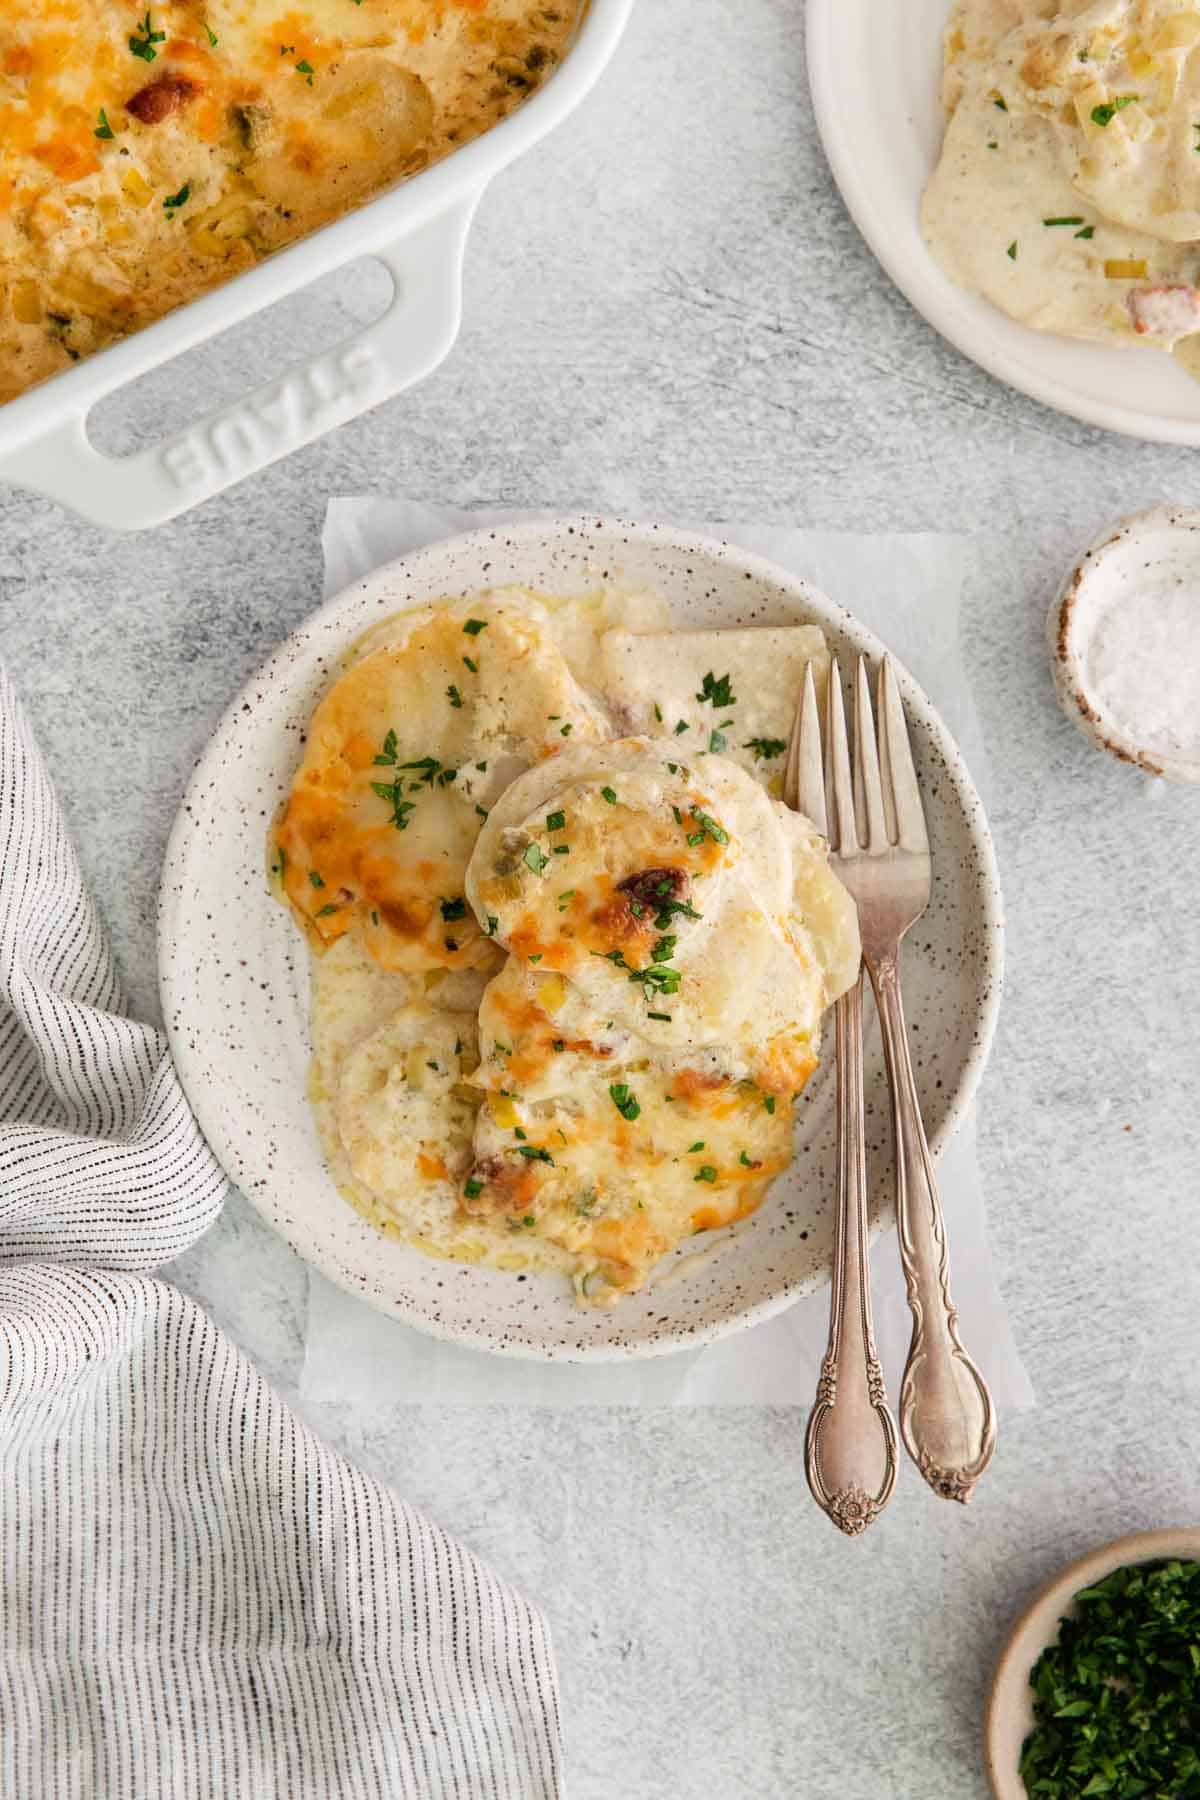 Scalloped potatoes on a plate with a fork